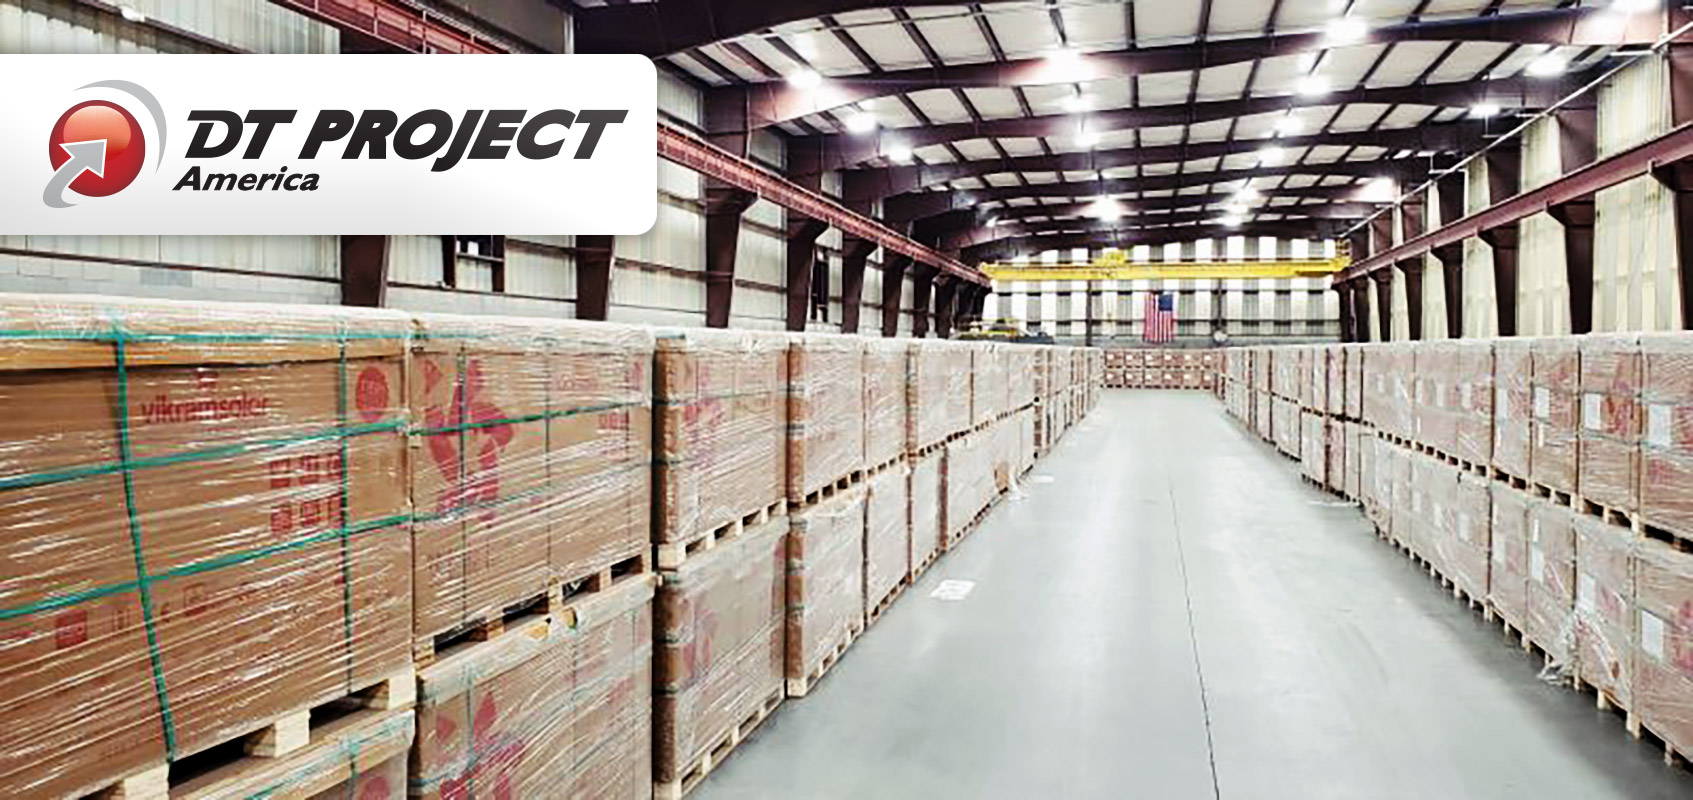 DT Project America are Experts in the Logistics of All Things Solar